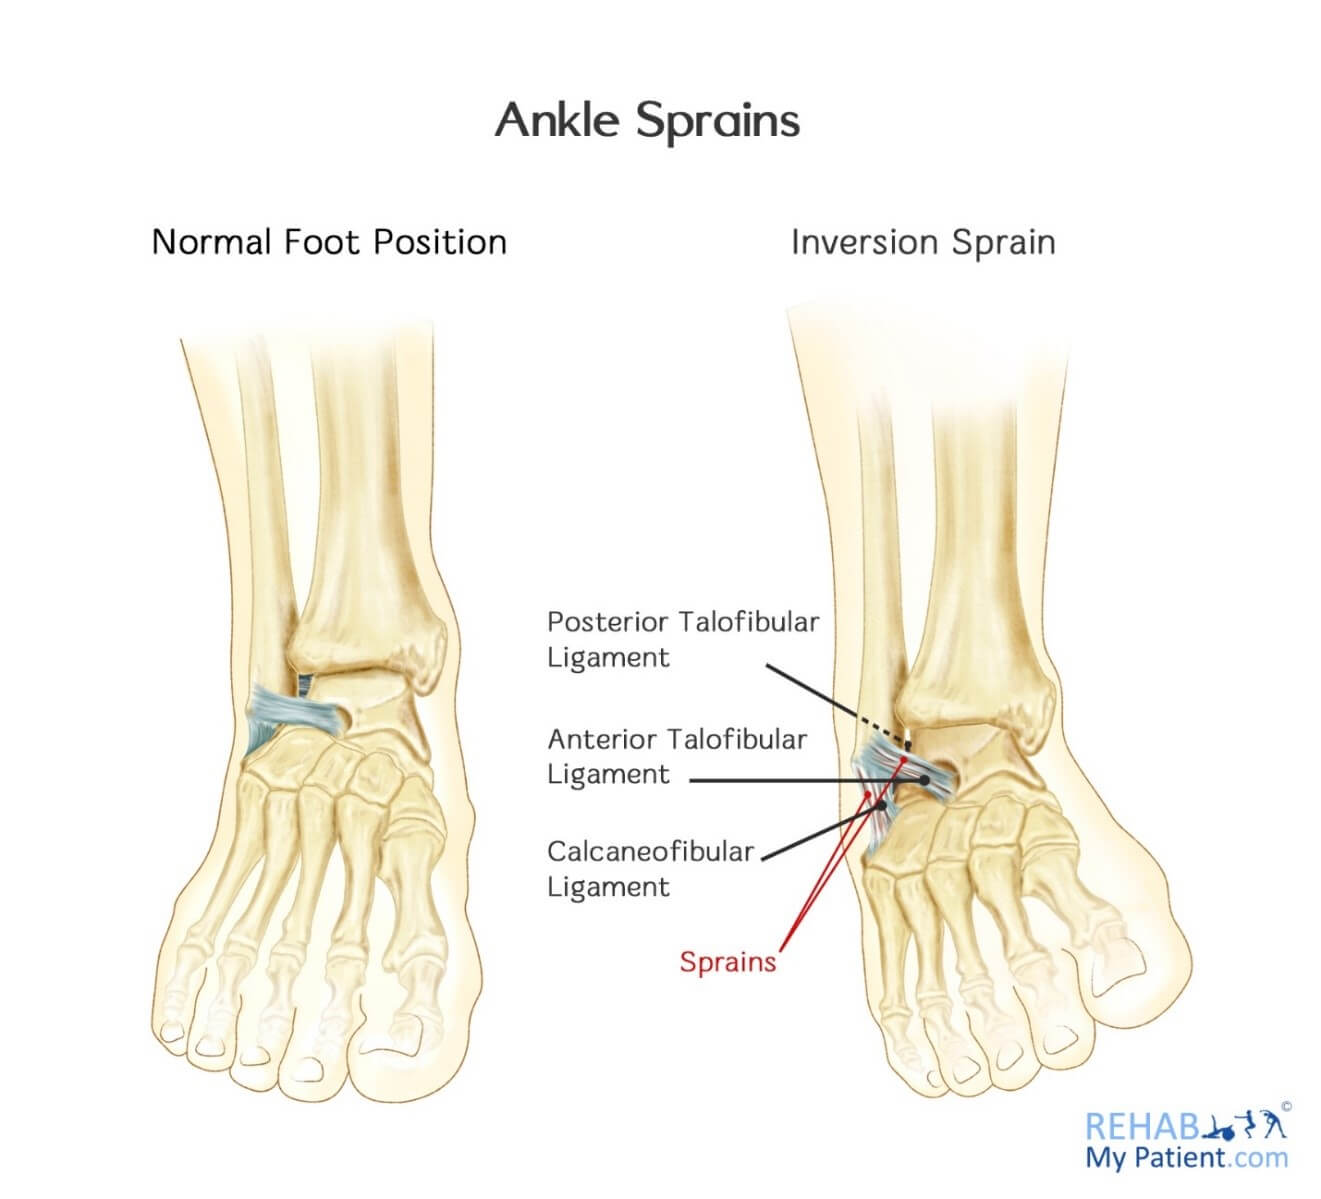 Inversion Sprain of the Ankle